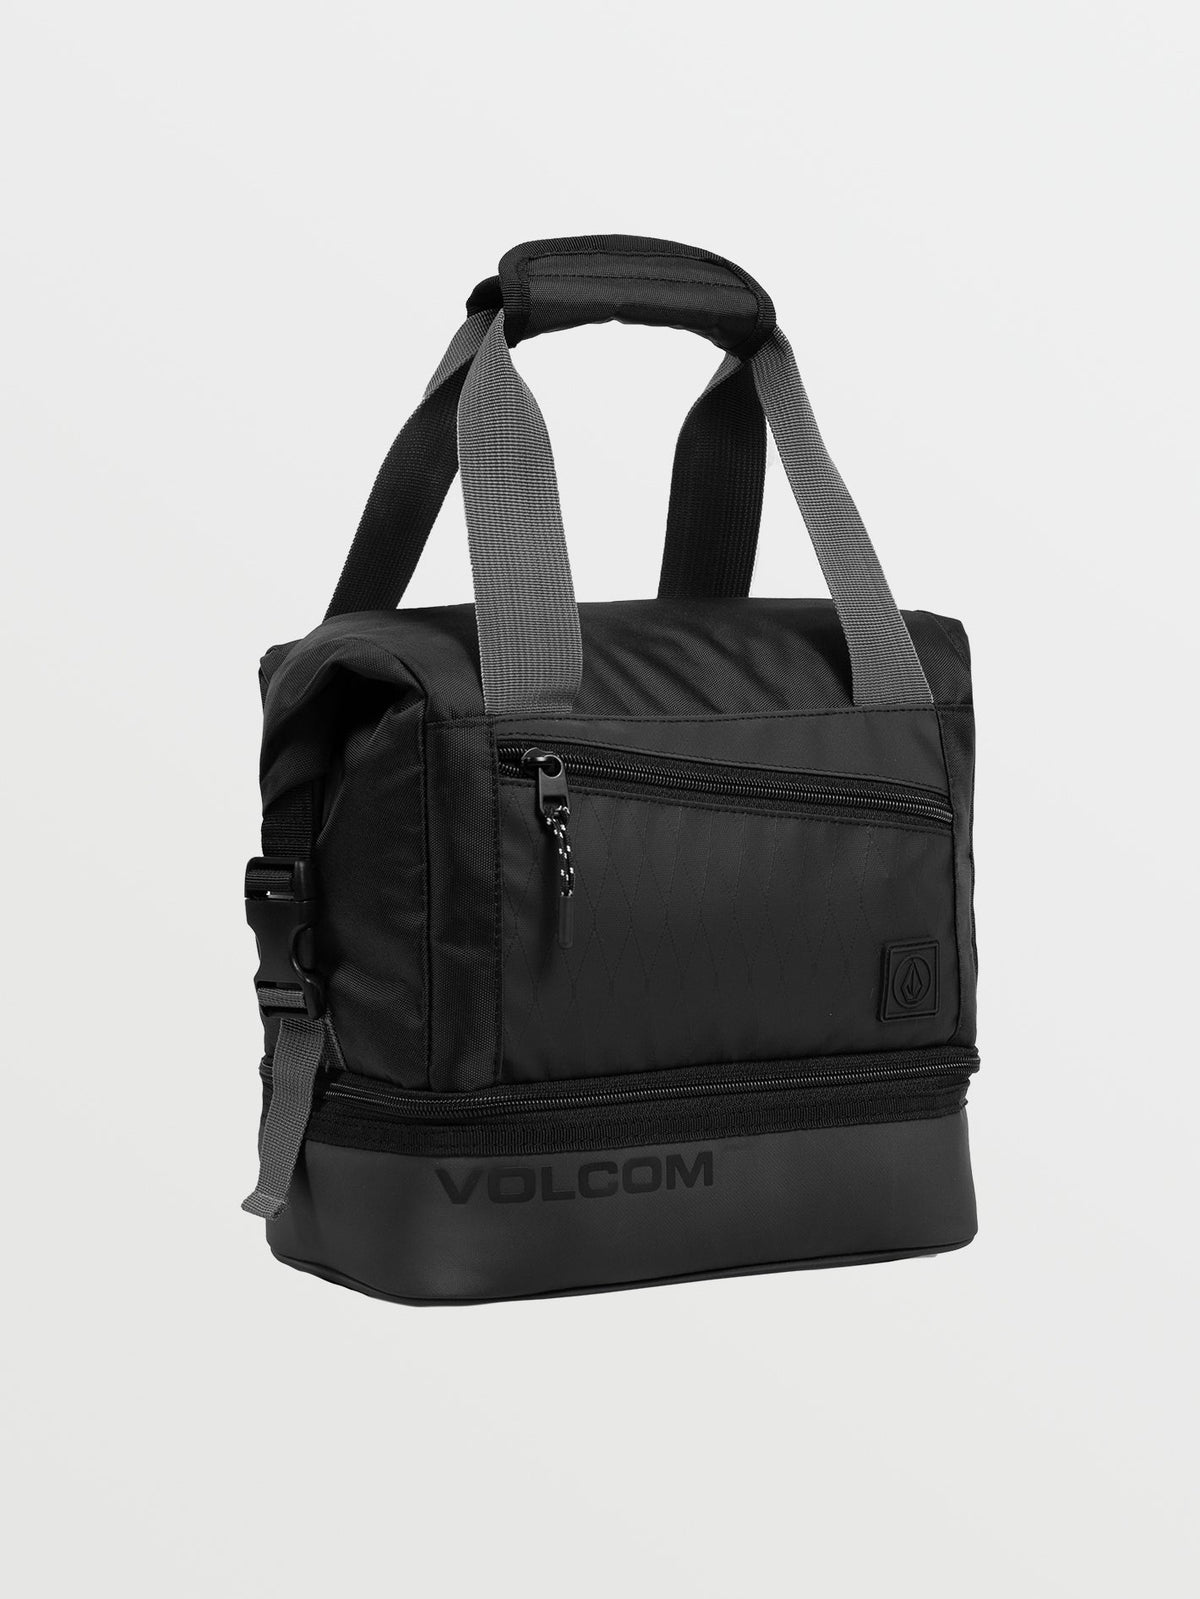 Volcom Outbound Rolltop Lunch Kit Black